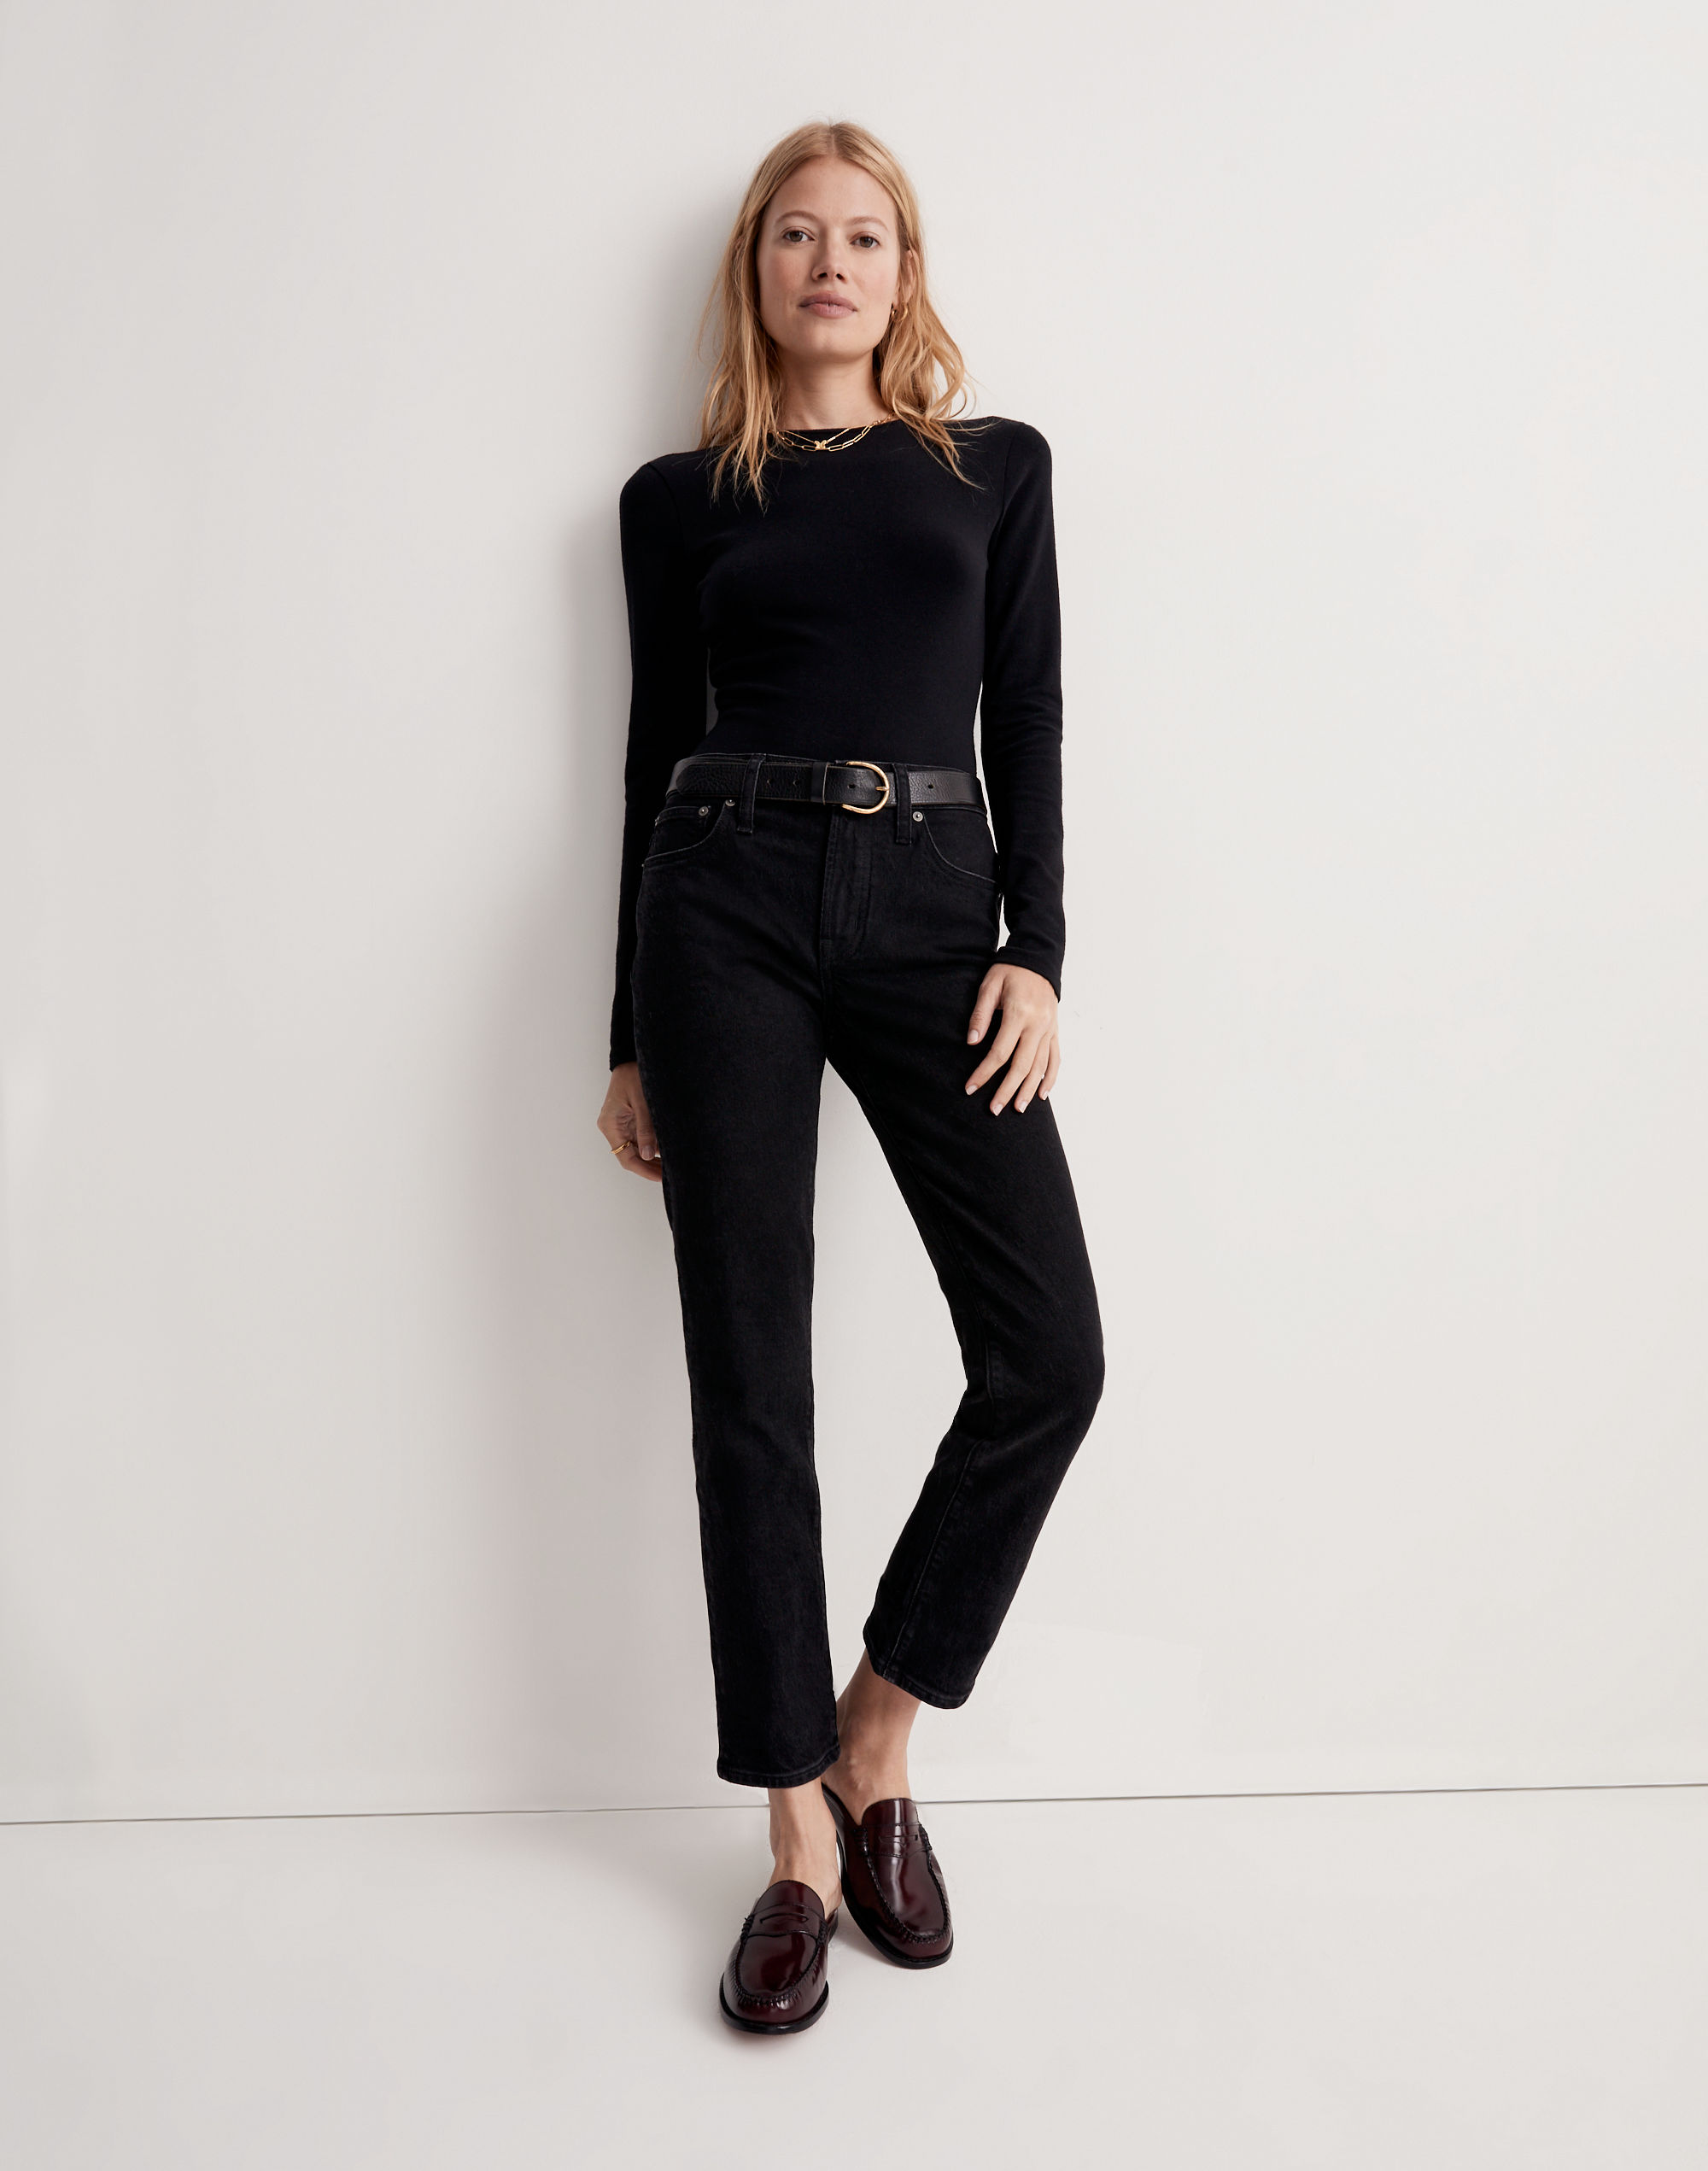 The Mid-Rise Perfect Vintage Jean in Clean Black Wash